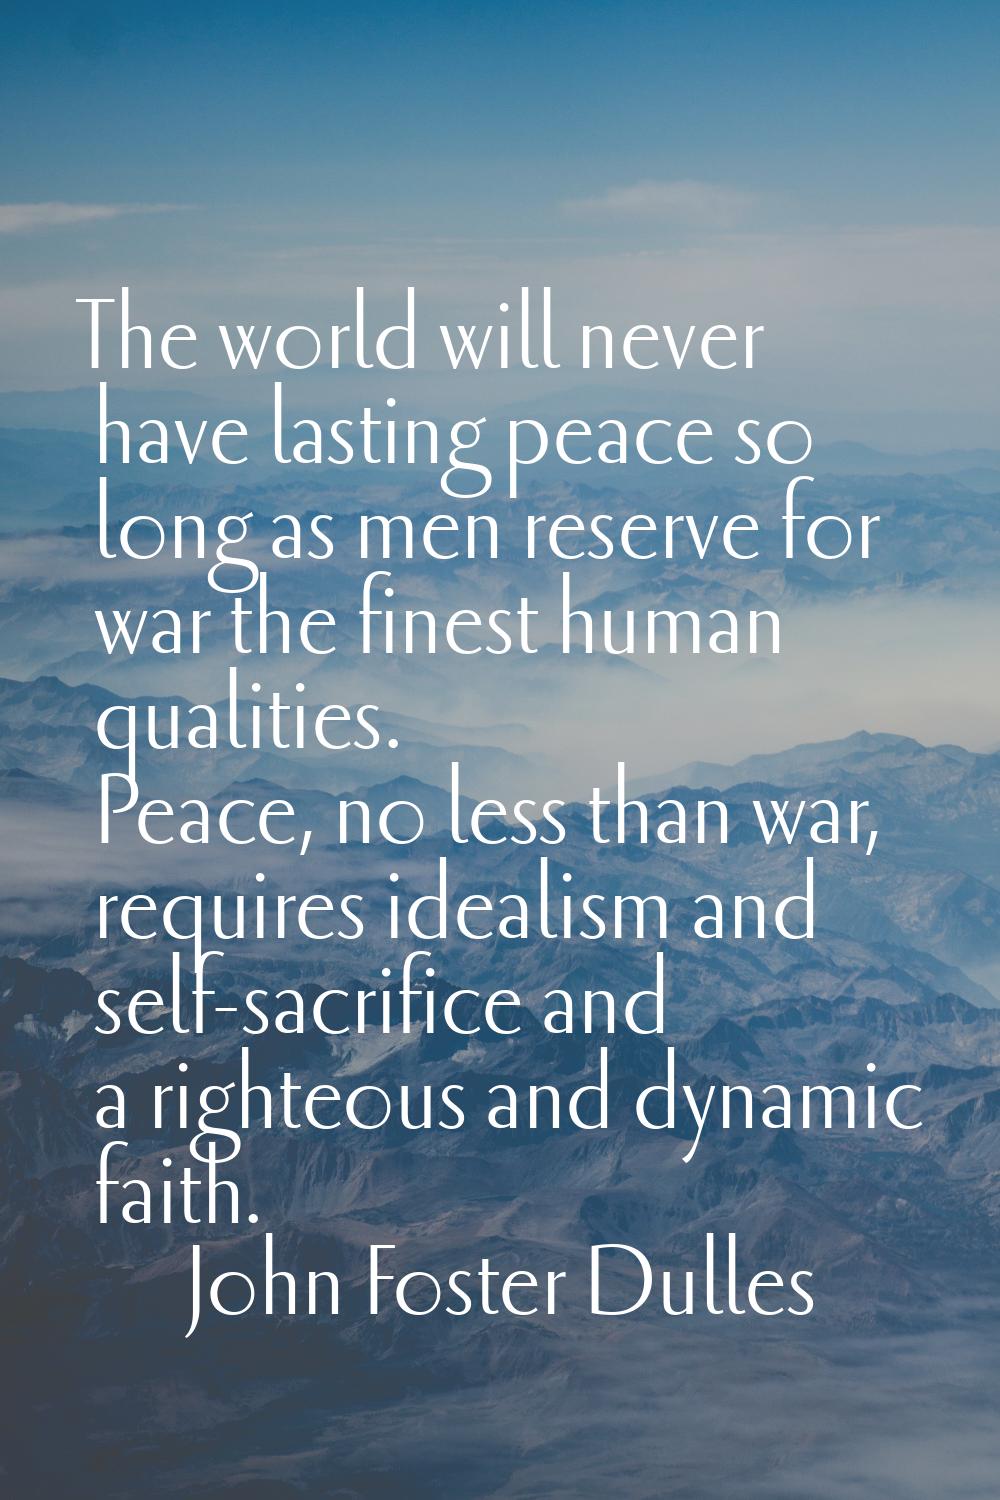 The world will never have lasting peace so long as men reserve for war the finest human qualities. 